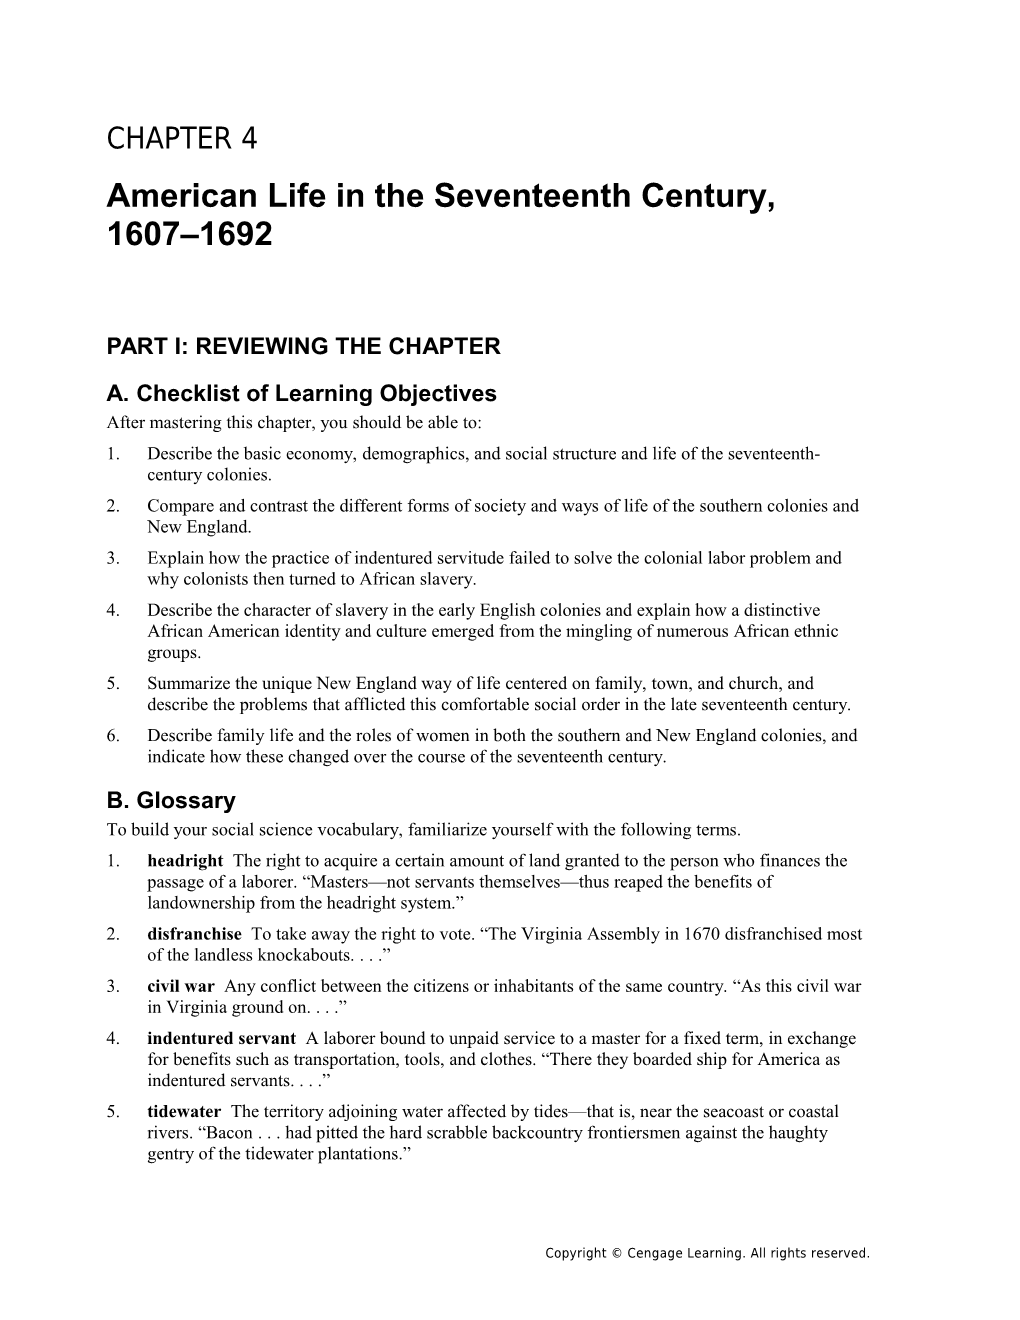 American Life in the Seventeenth Century, 1607 1692